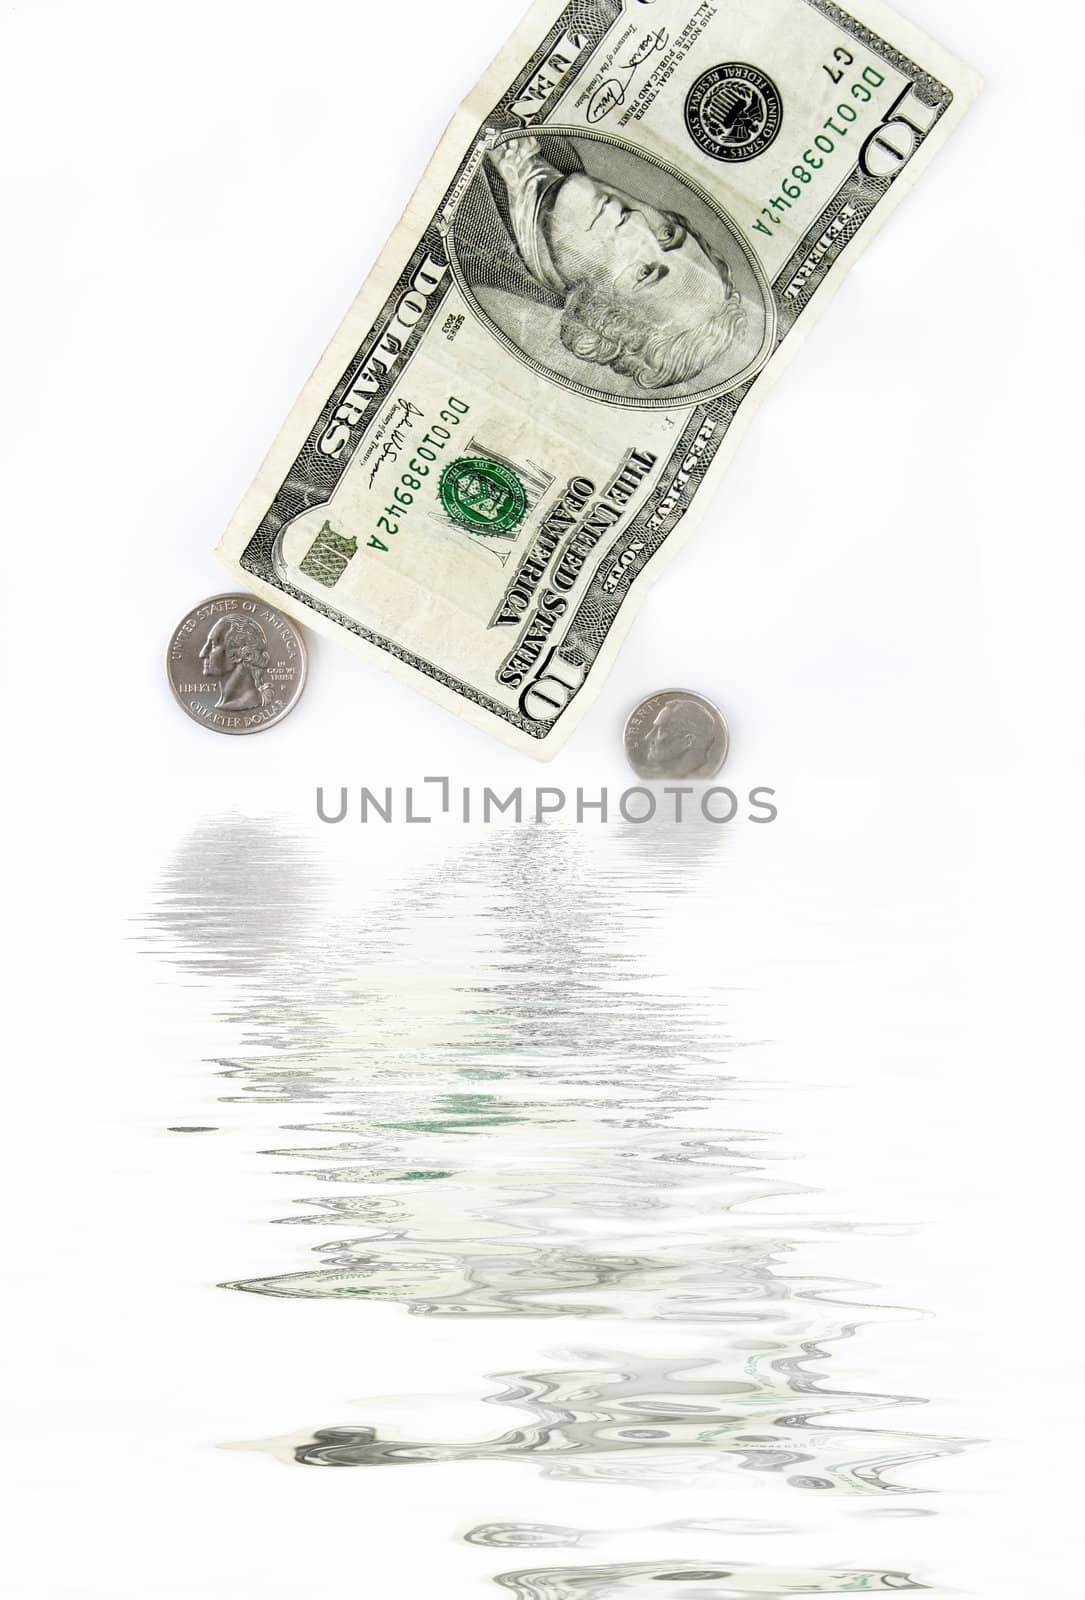 Ten dollar bill and loose change going into water.  Concept of a sinking economy.